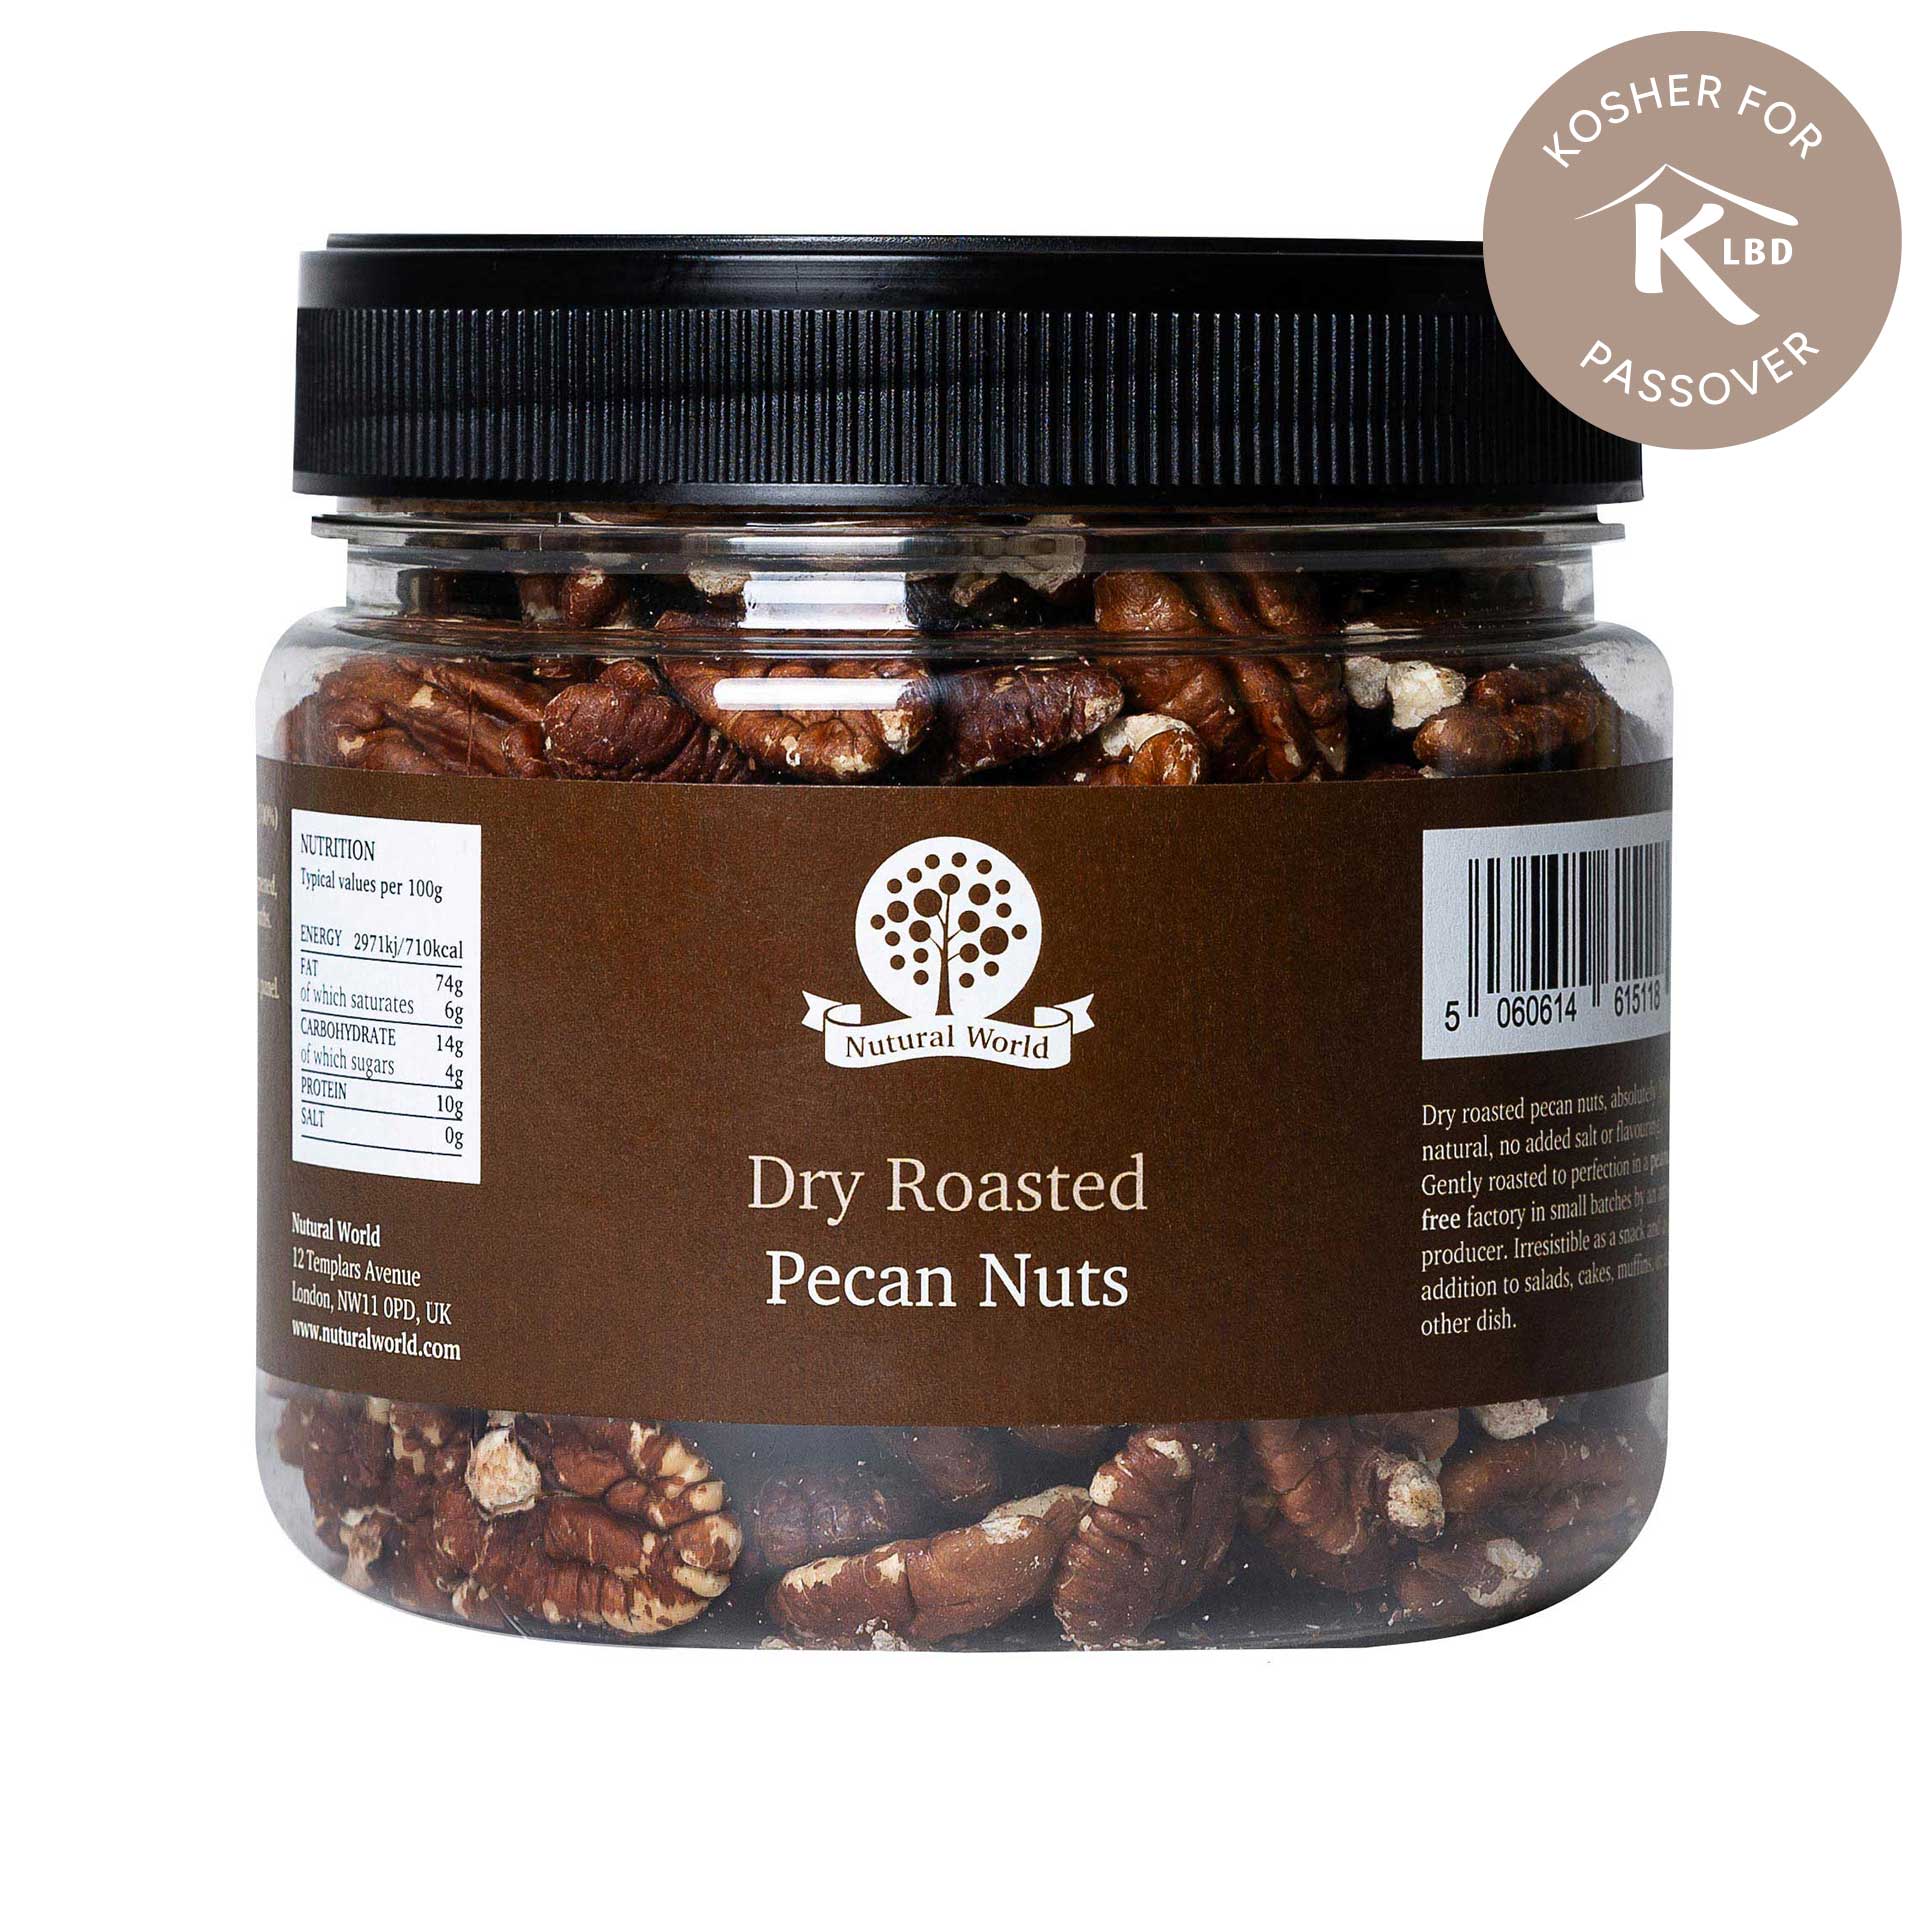 Dry Roasted Pecan Nuts - Unsalted (400g) - Kosher for Passover